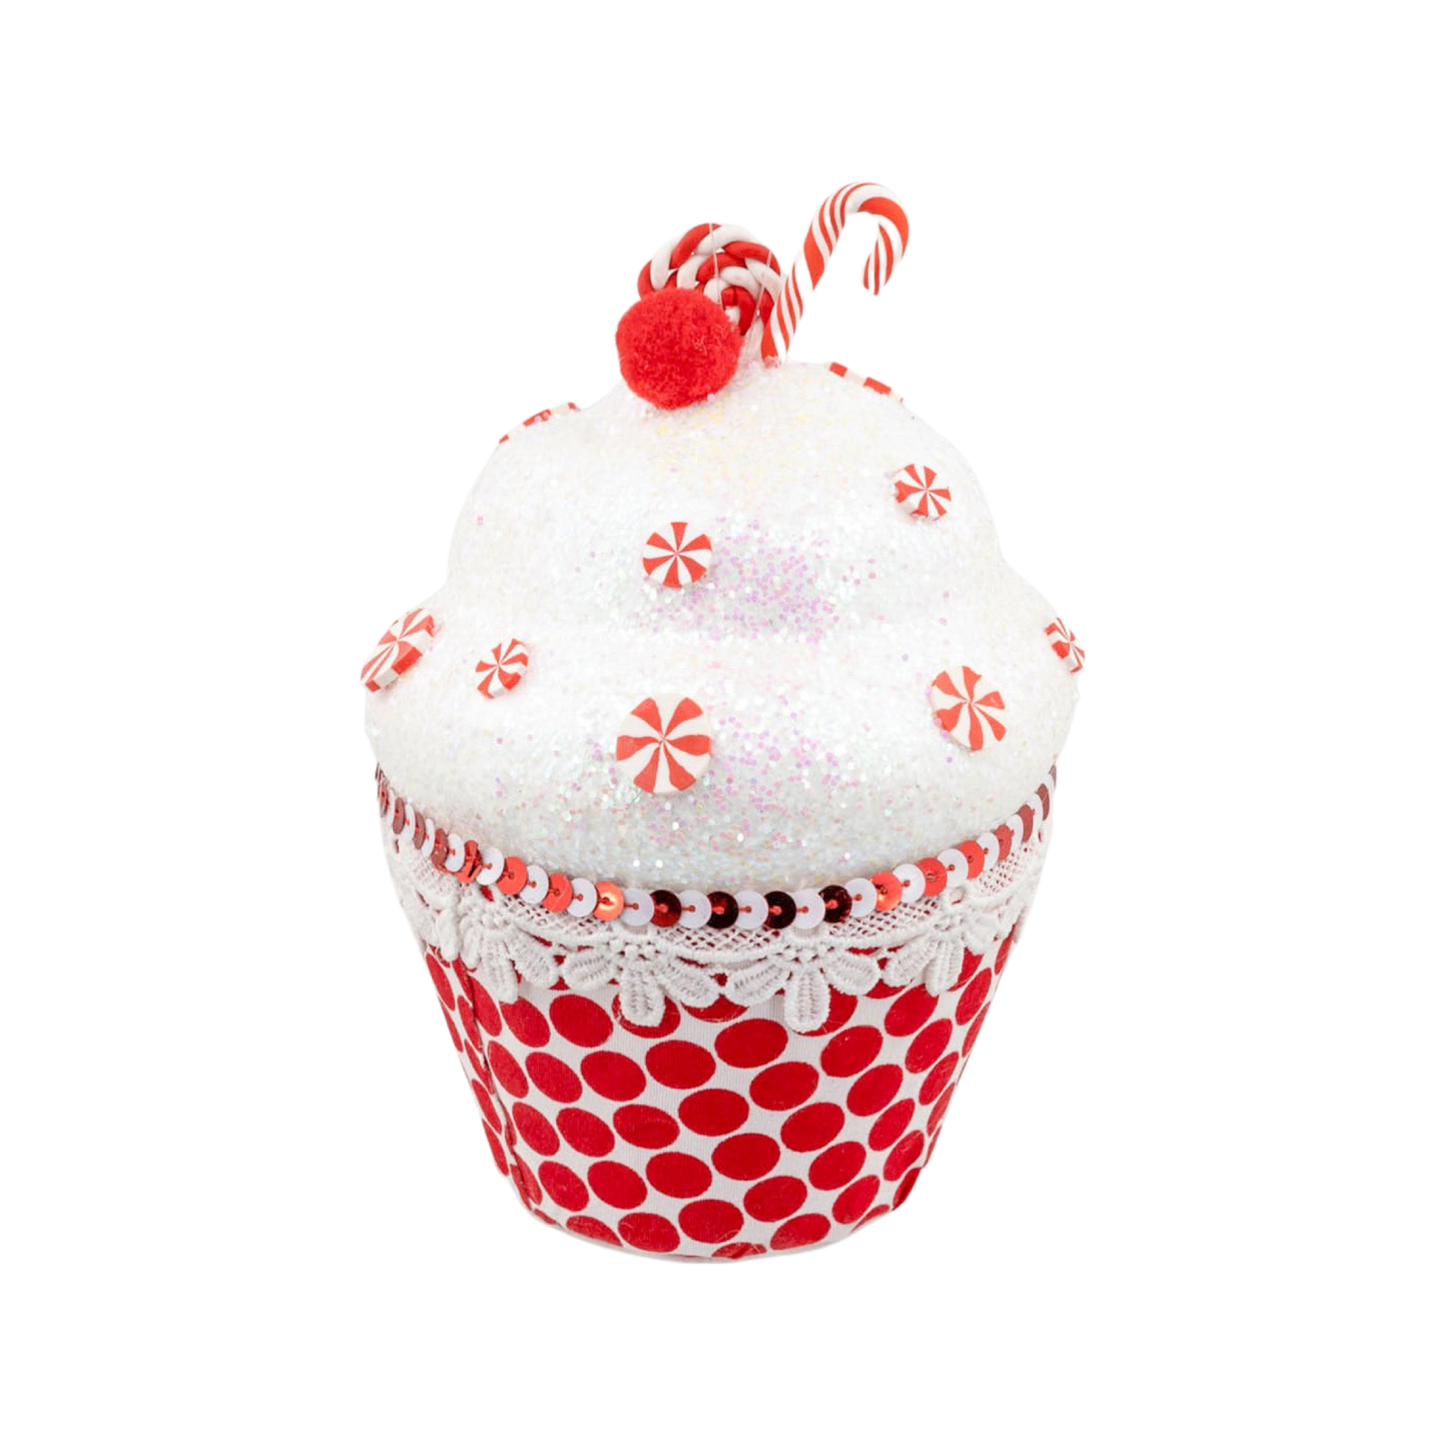 XM20006 FROSTED CUPCAKE,6.7in-16/32P